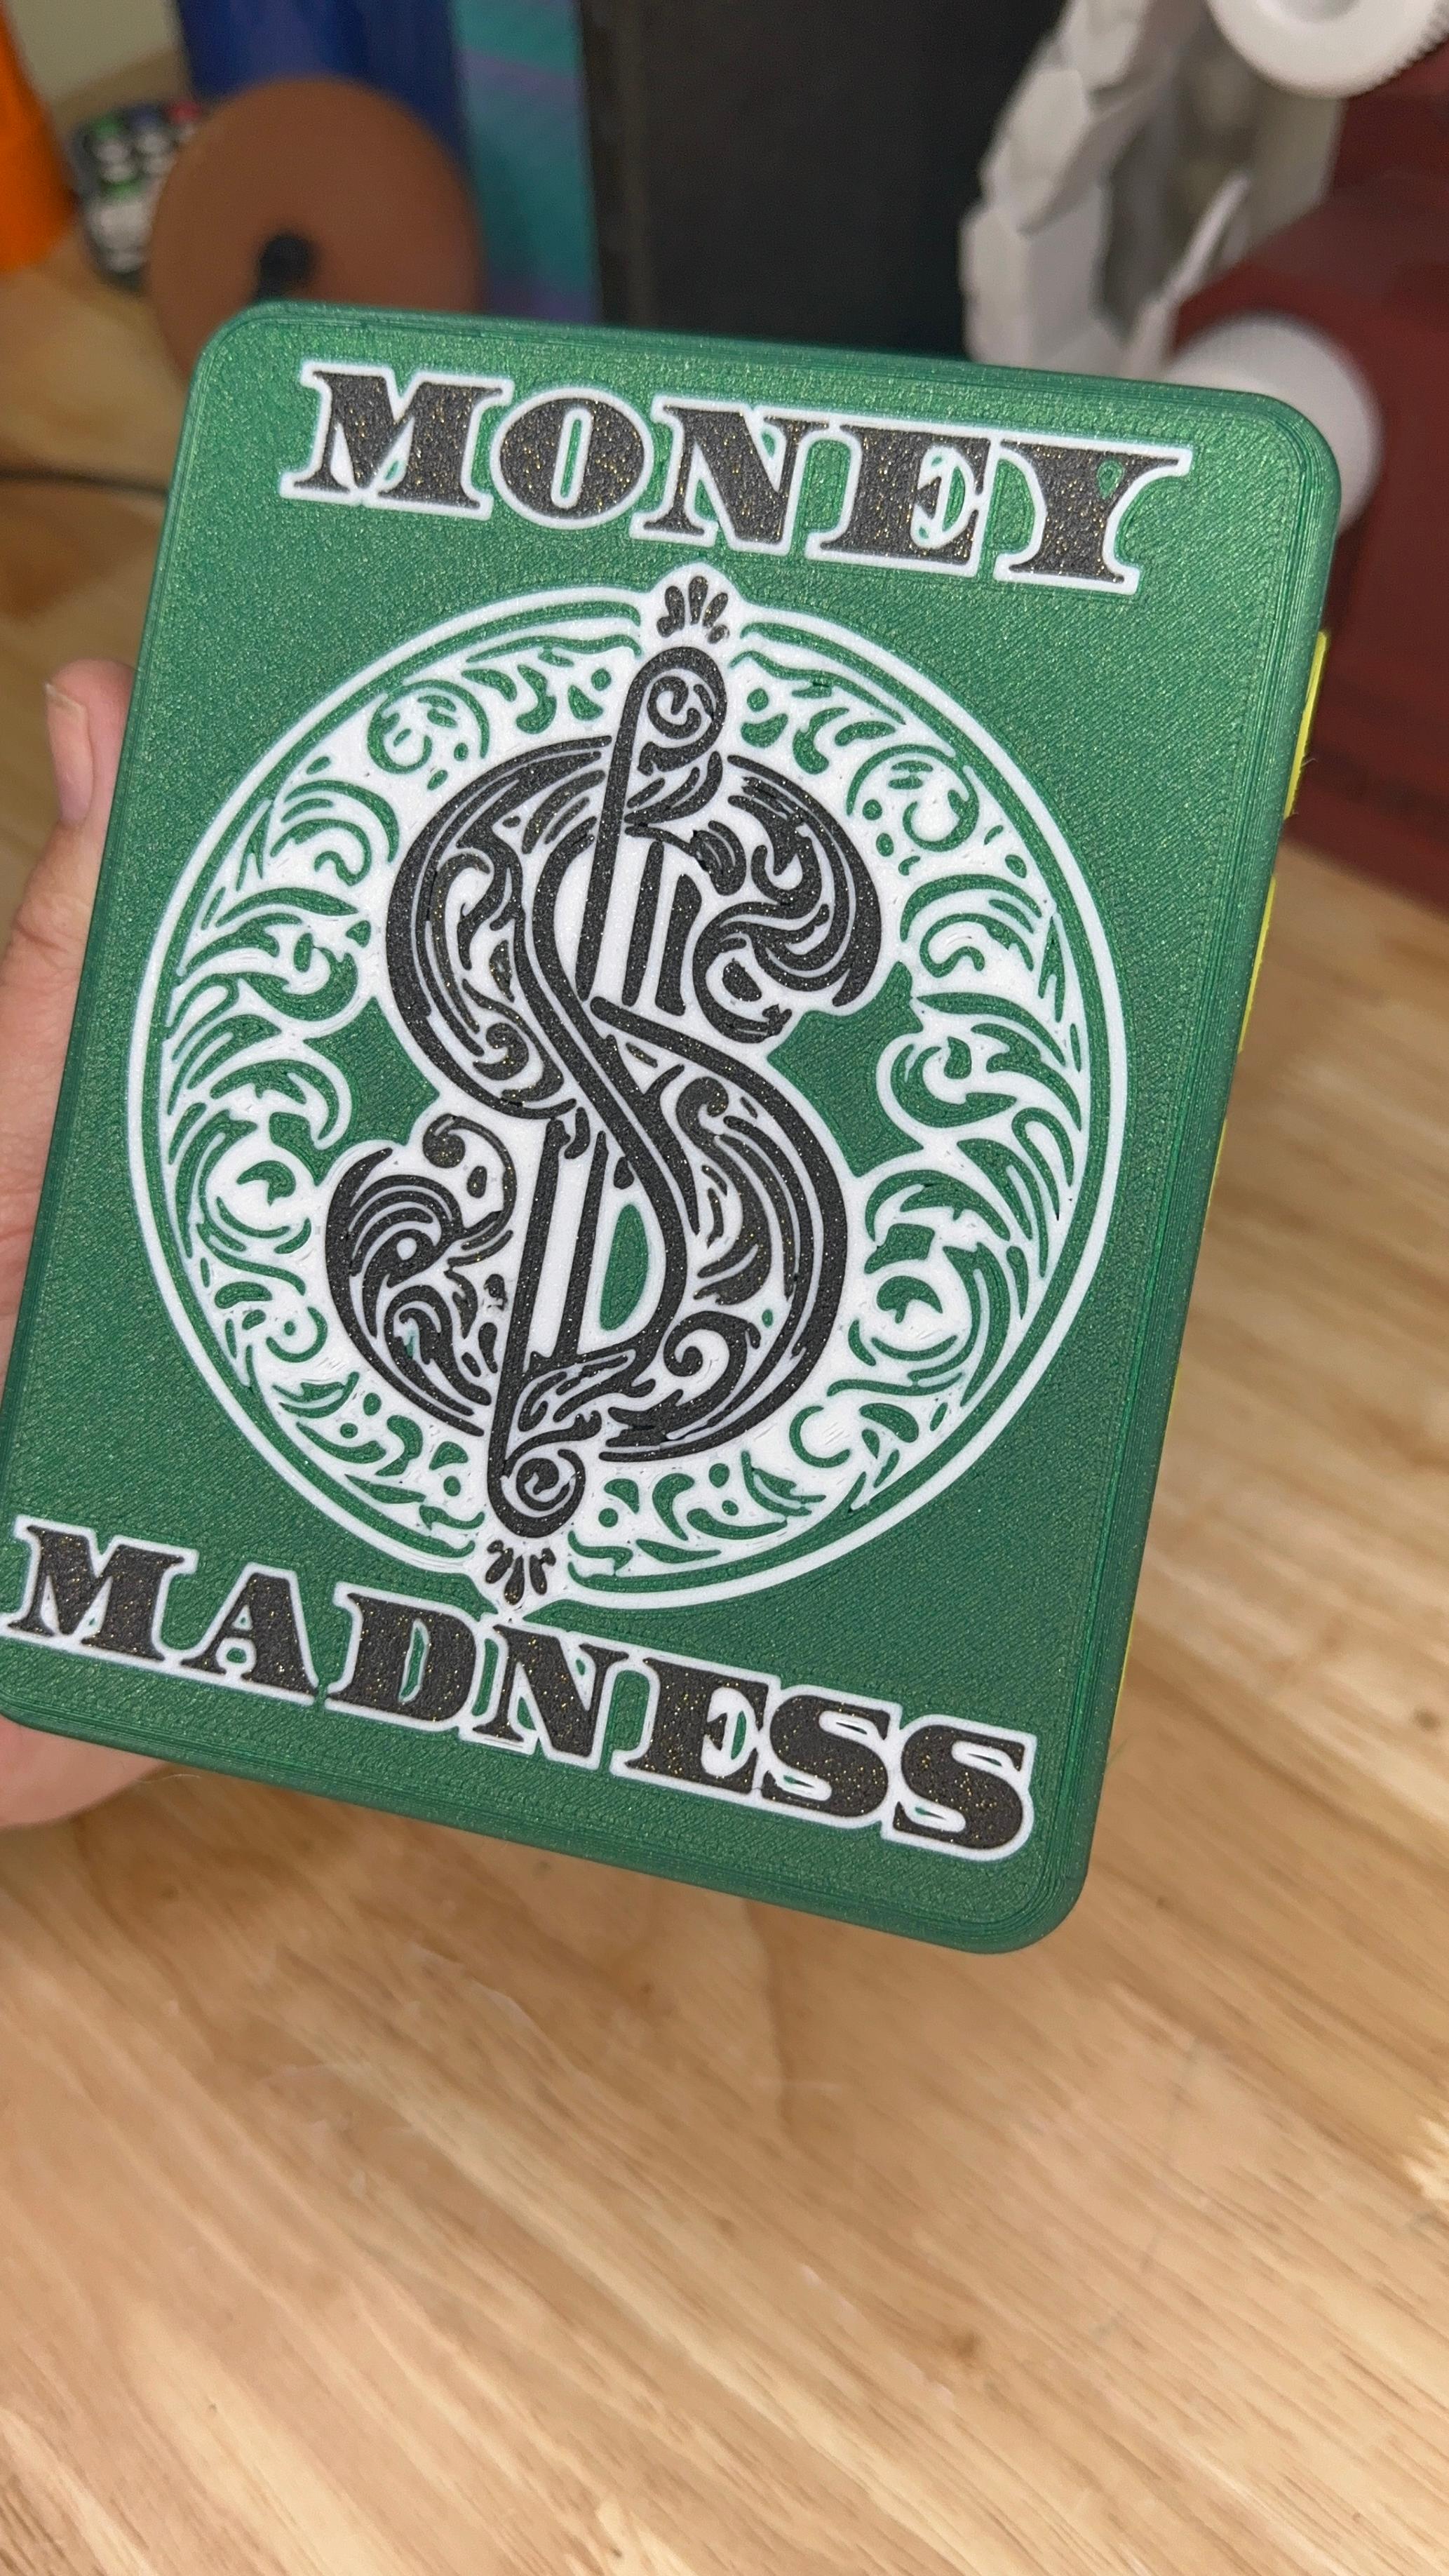 Money Madness Annoying Cash, Card Gift Box - A cash or card gift box for co-workers, friends, family 3d model